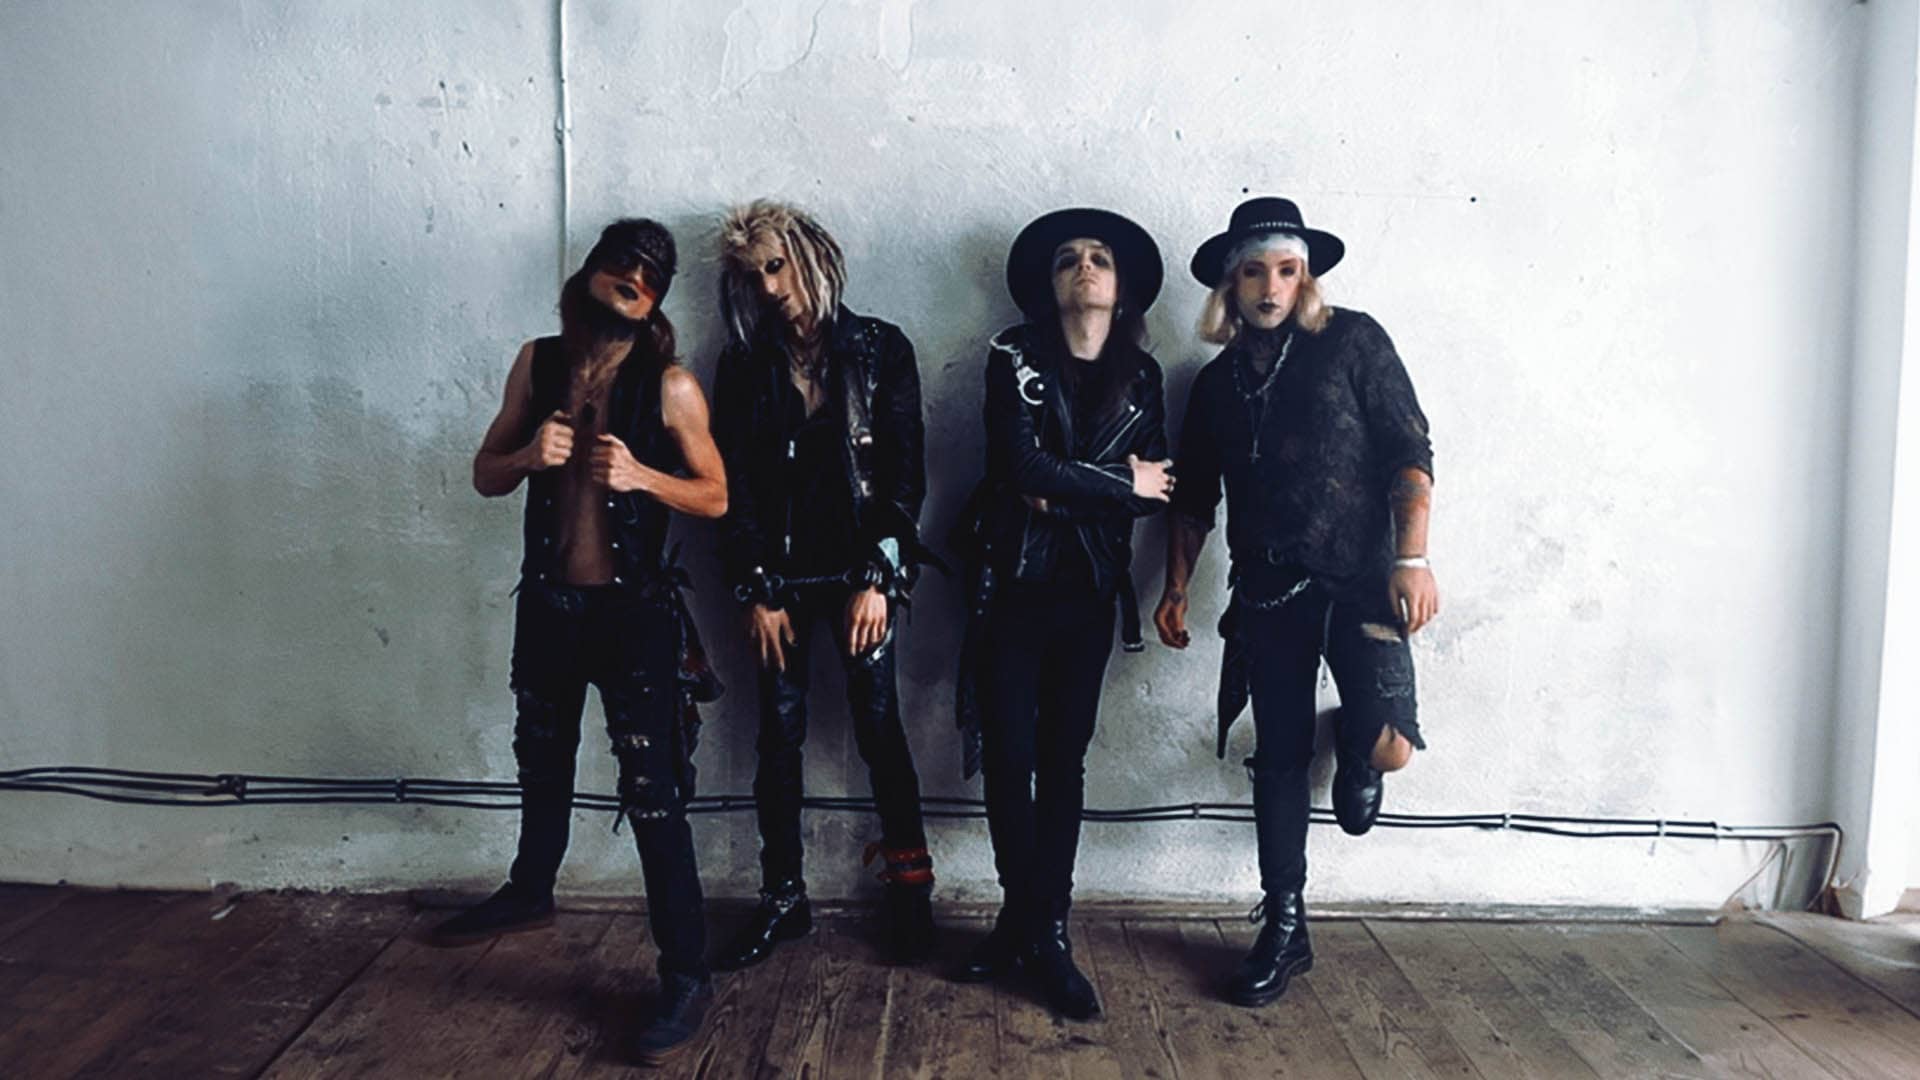 Band Wildstreet posing against a white wall in rock attire for 